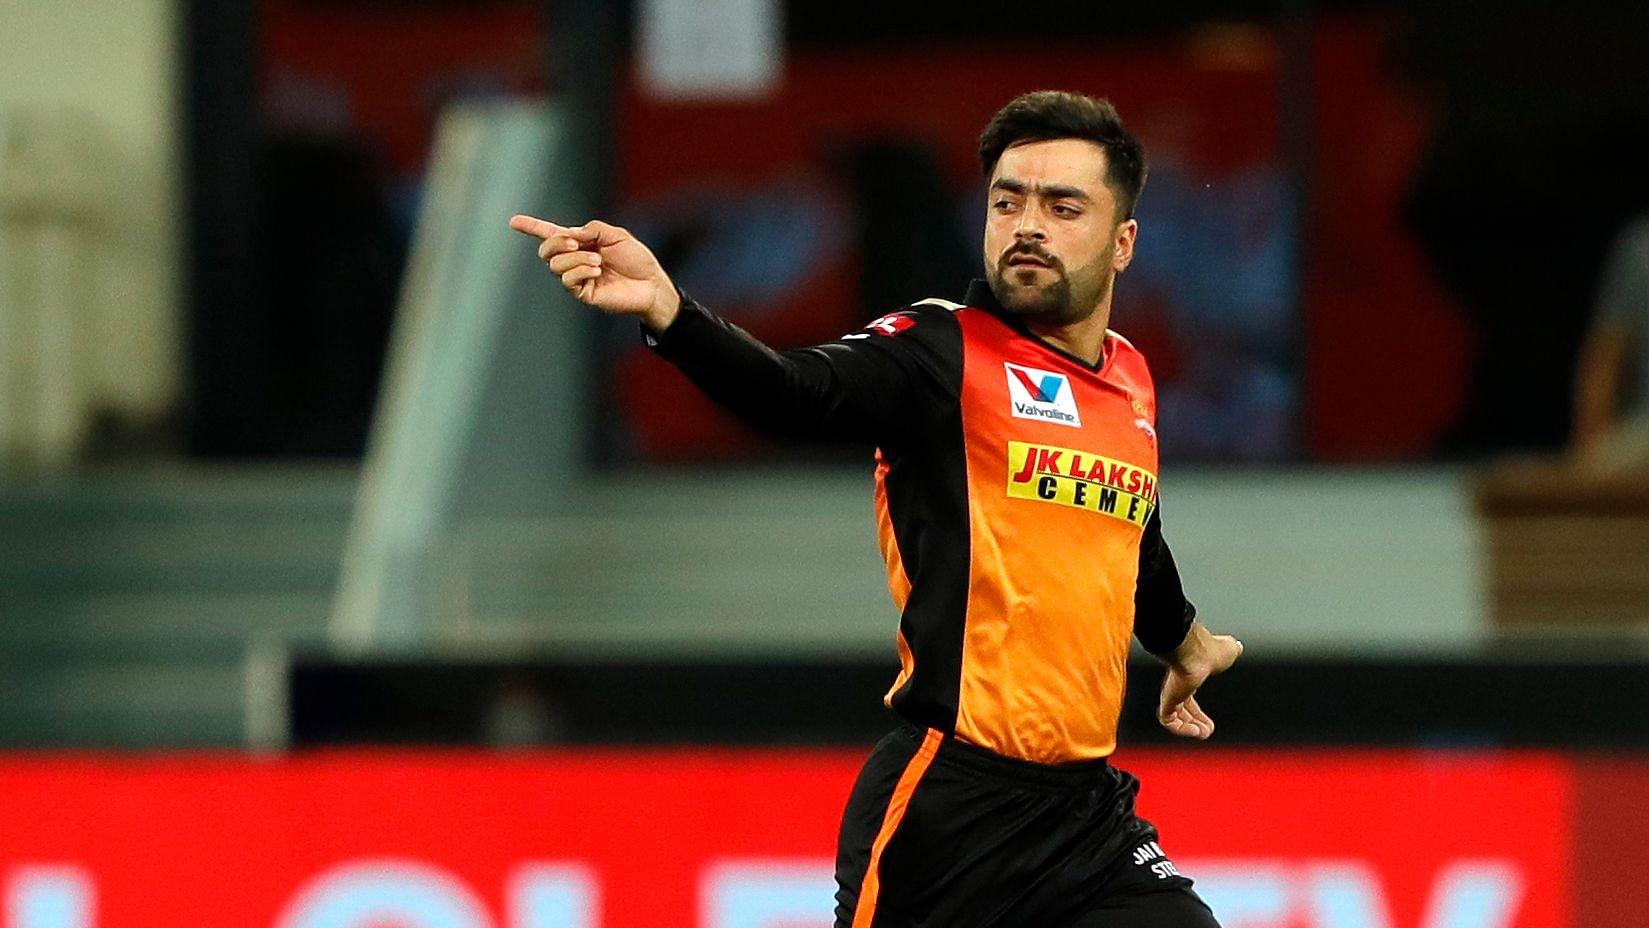 Rashid Khan has been a very important part of the SRH campaign with his impressive bowling efforts.